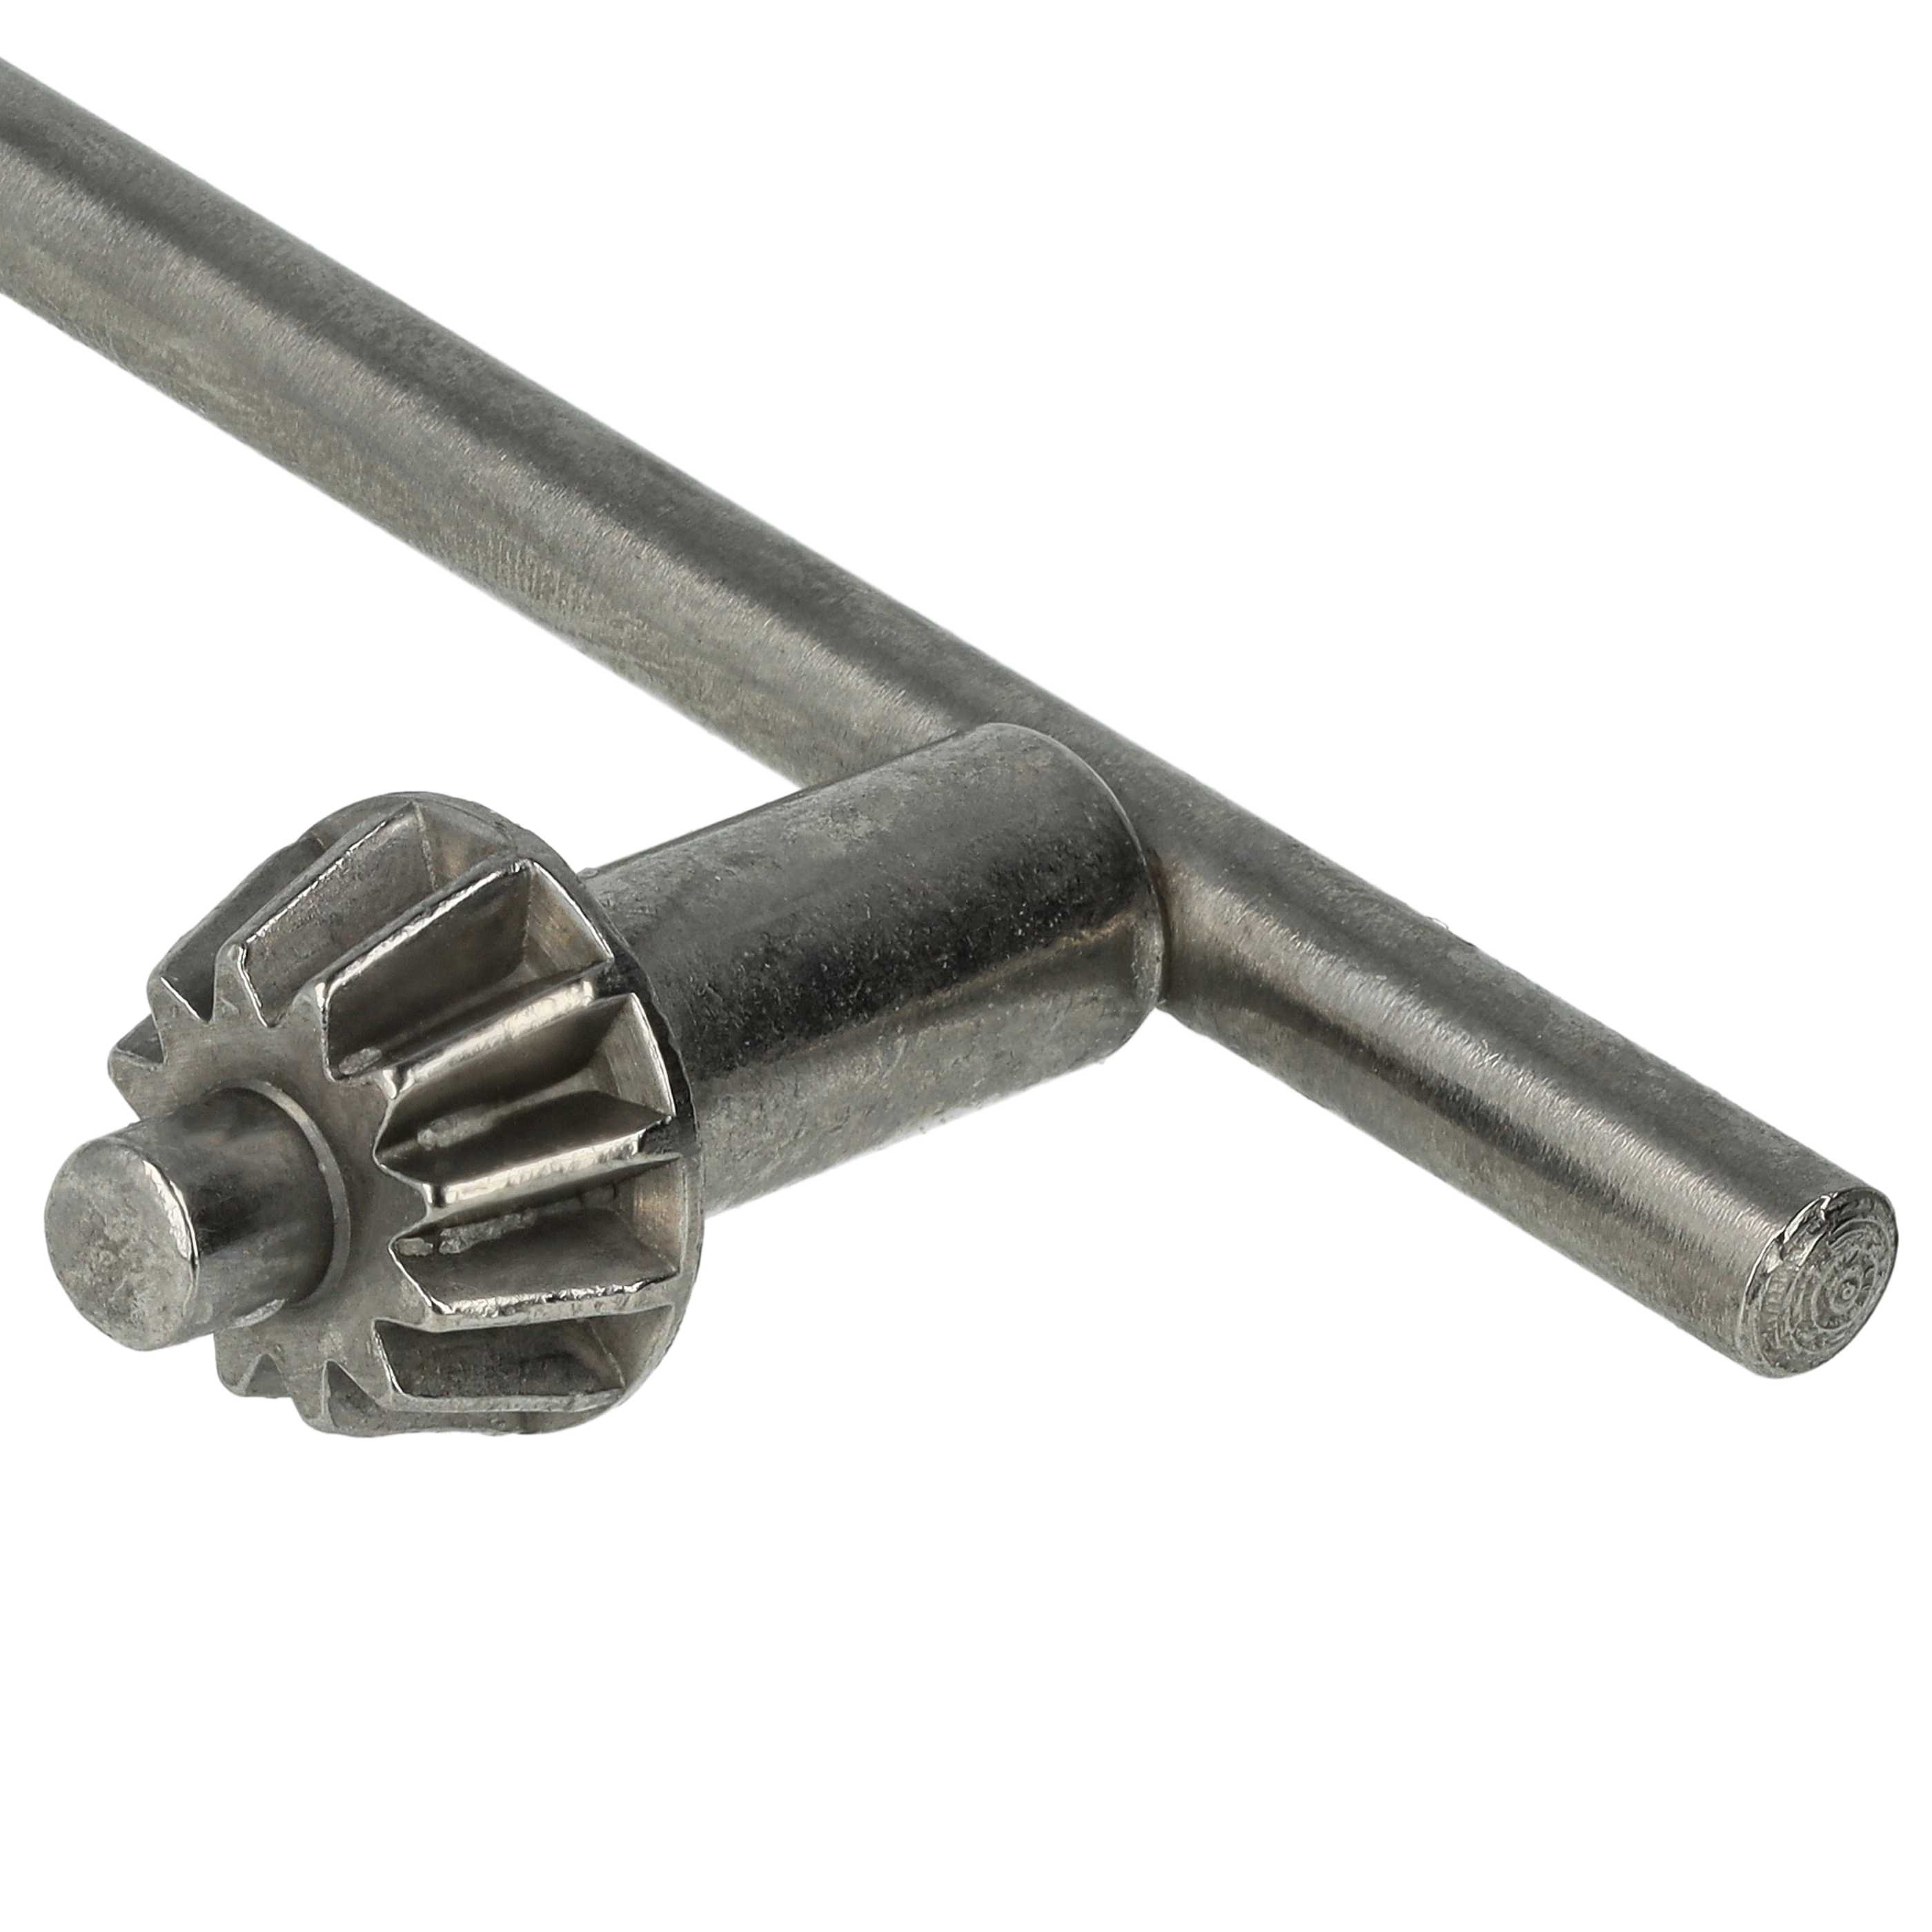 Drill Chuck Key S2A 10-13mm replaces Wolfcraft 2630000 for Drills from e.g. Metabo, AEG